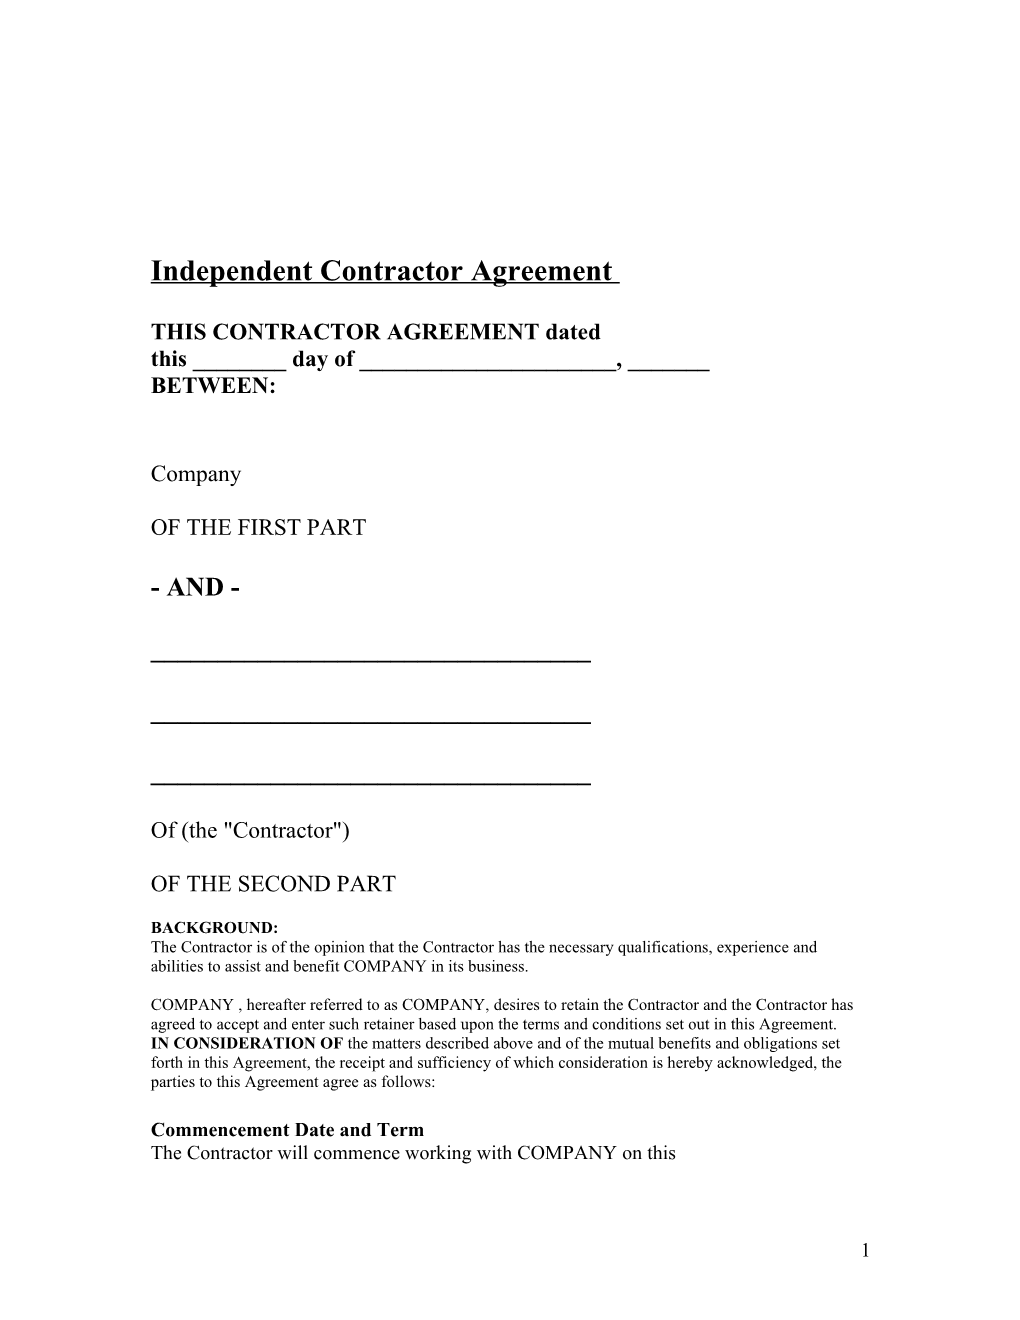 Independent Contractor Employment Agreement